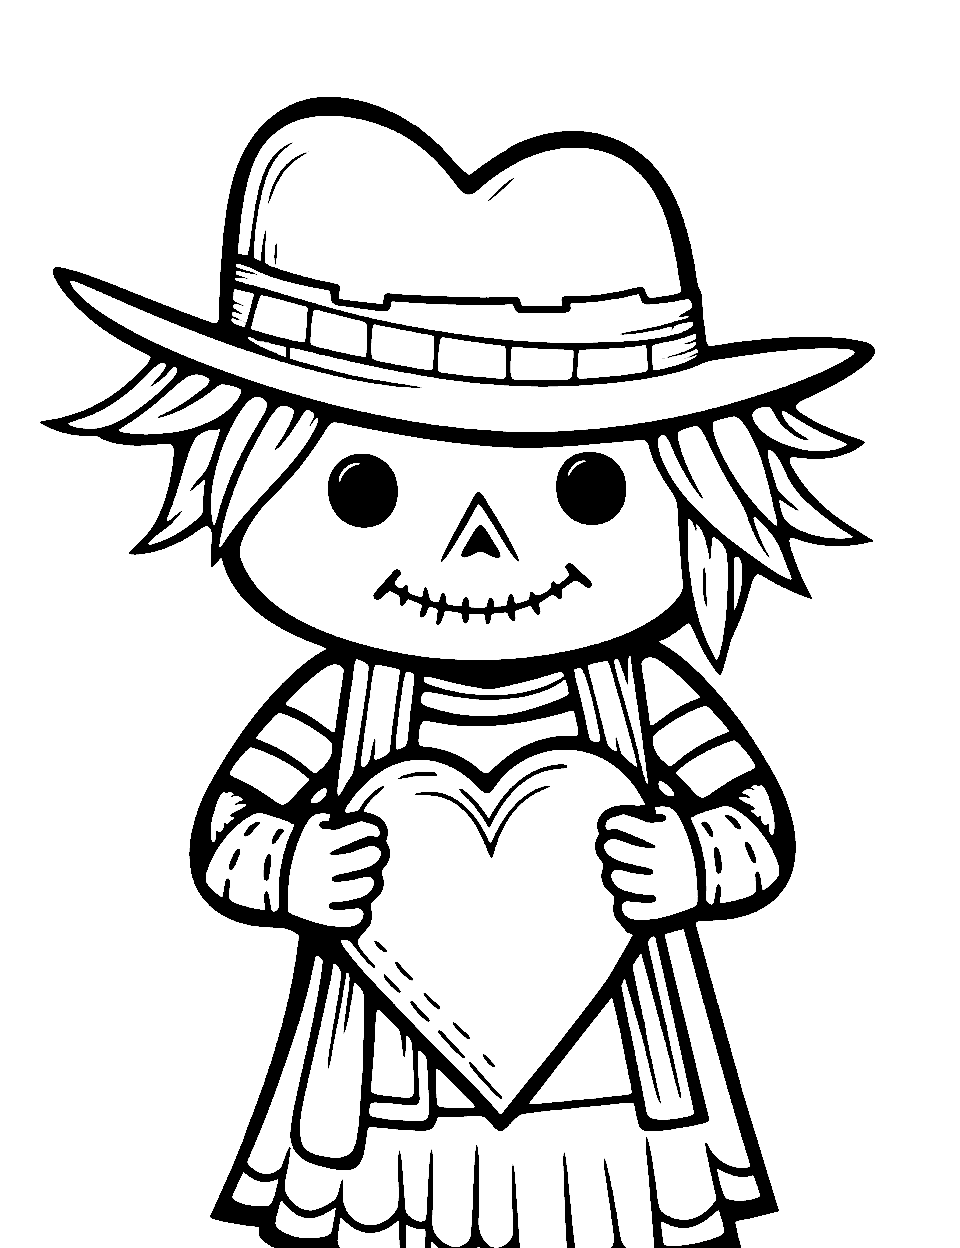 Heart Patched Scarecrow Coloring Page - A patched scarecrow holding a stitched heart in his hand.